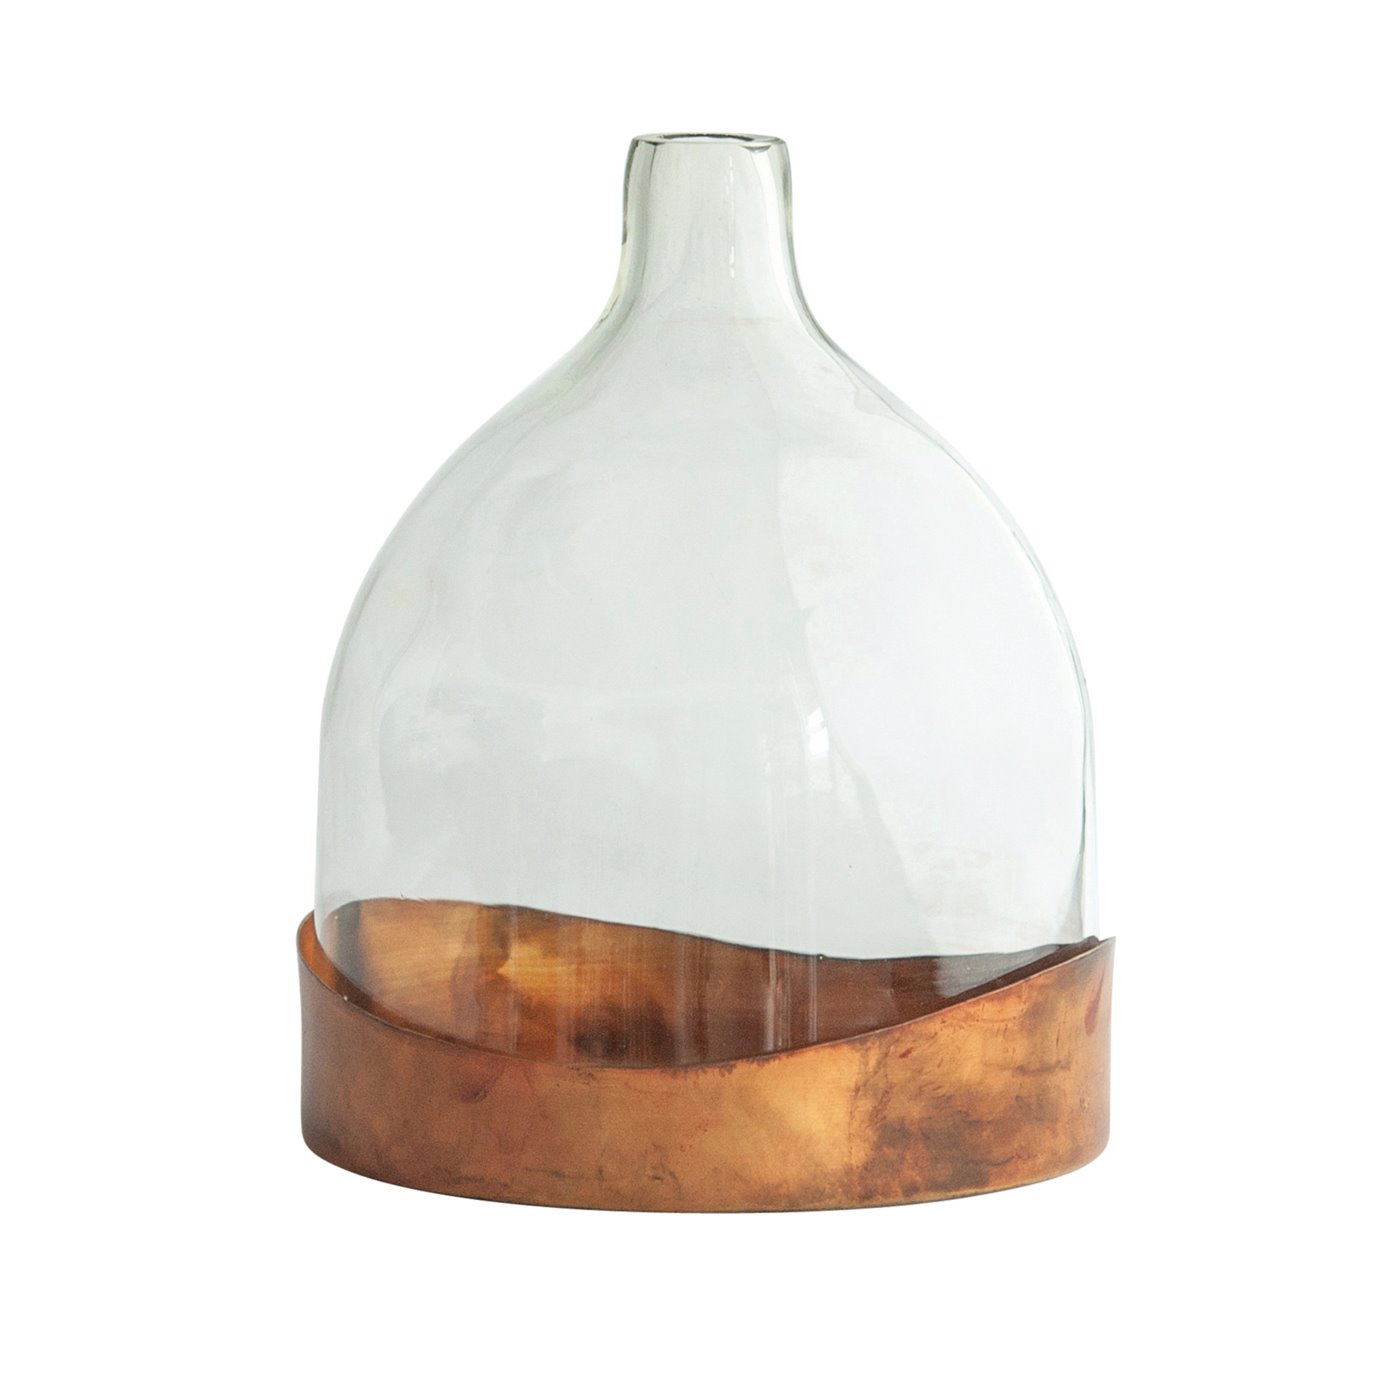 Glass Cloche with Antique Copper Finished Metal Tray (Set of 2 Pieces)